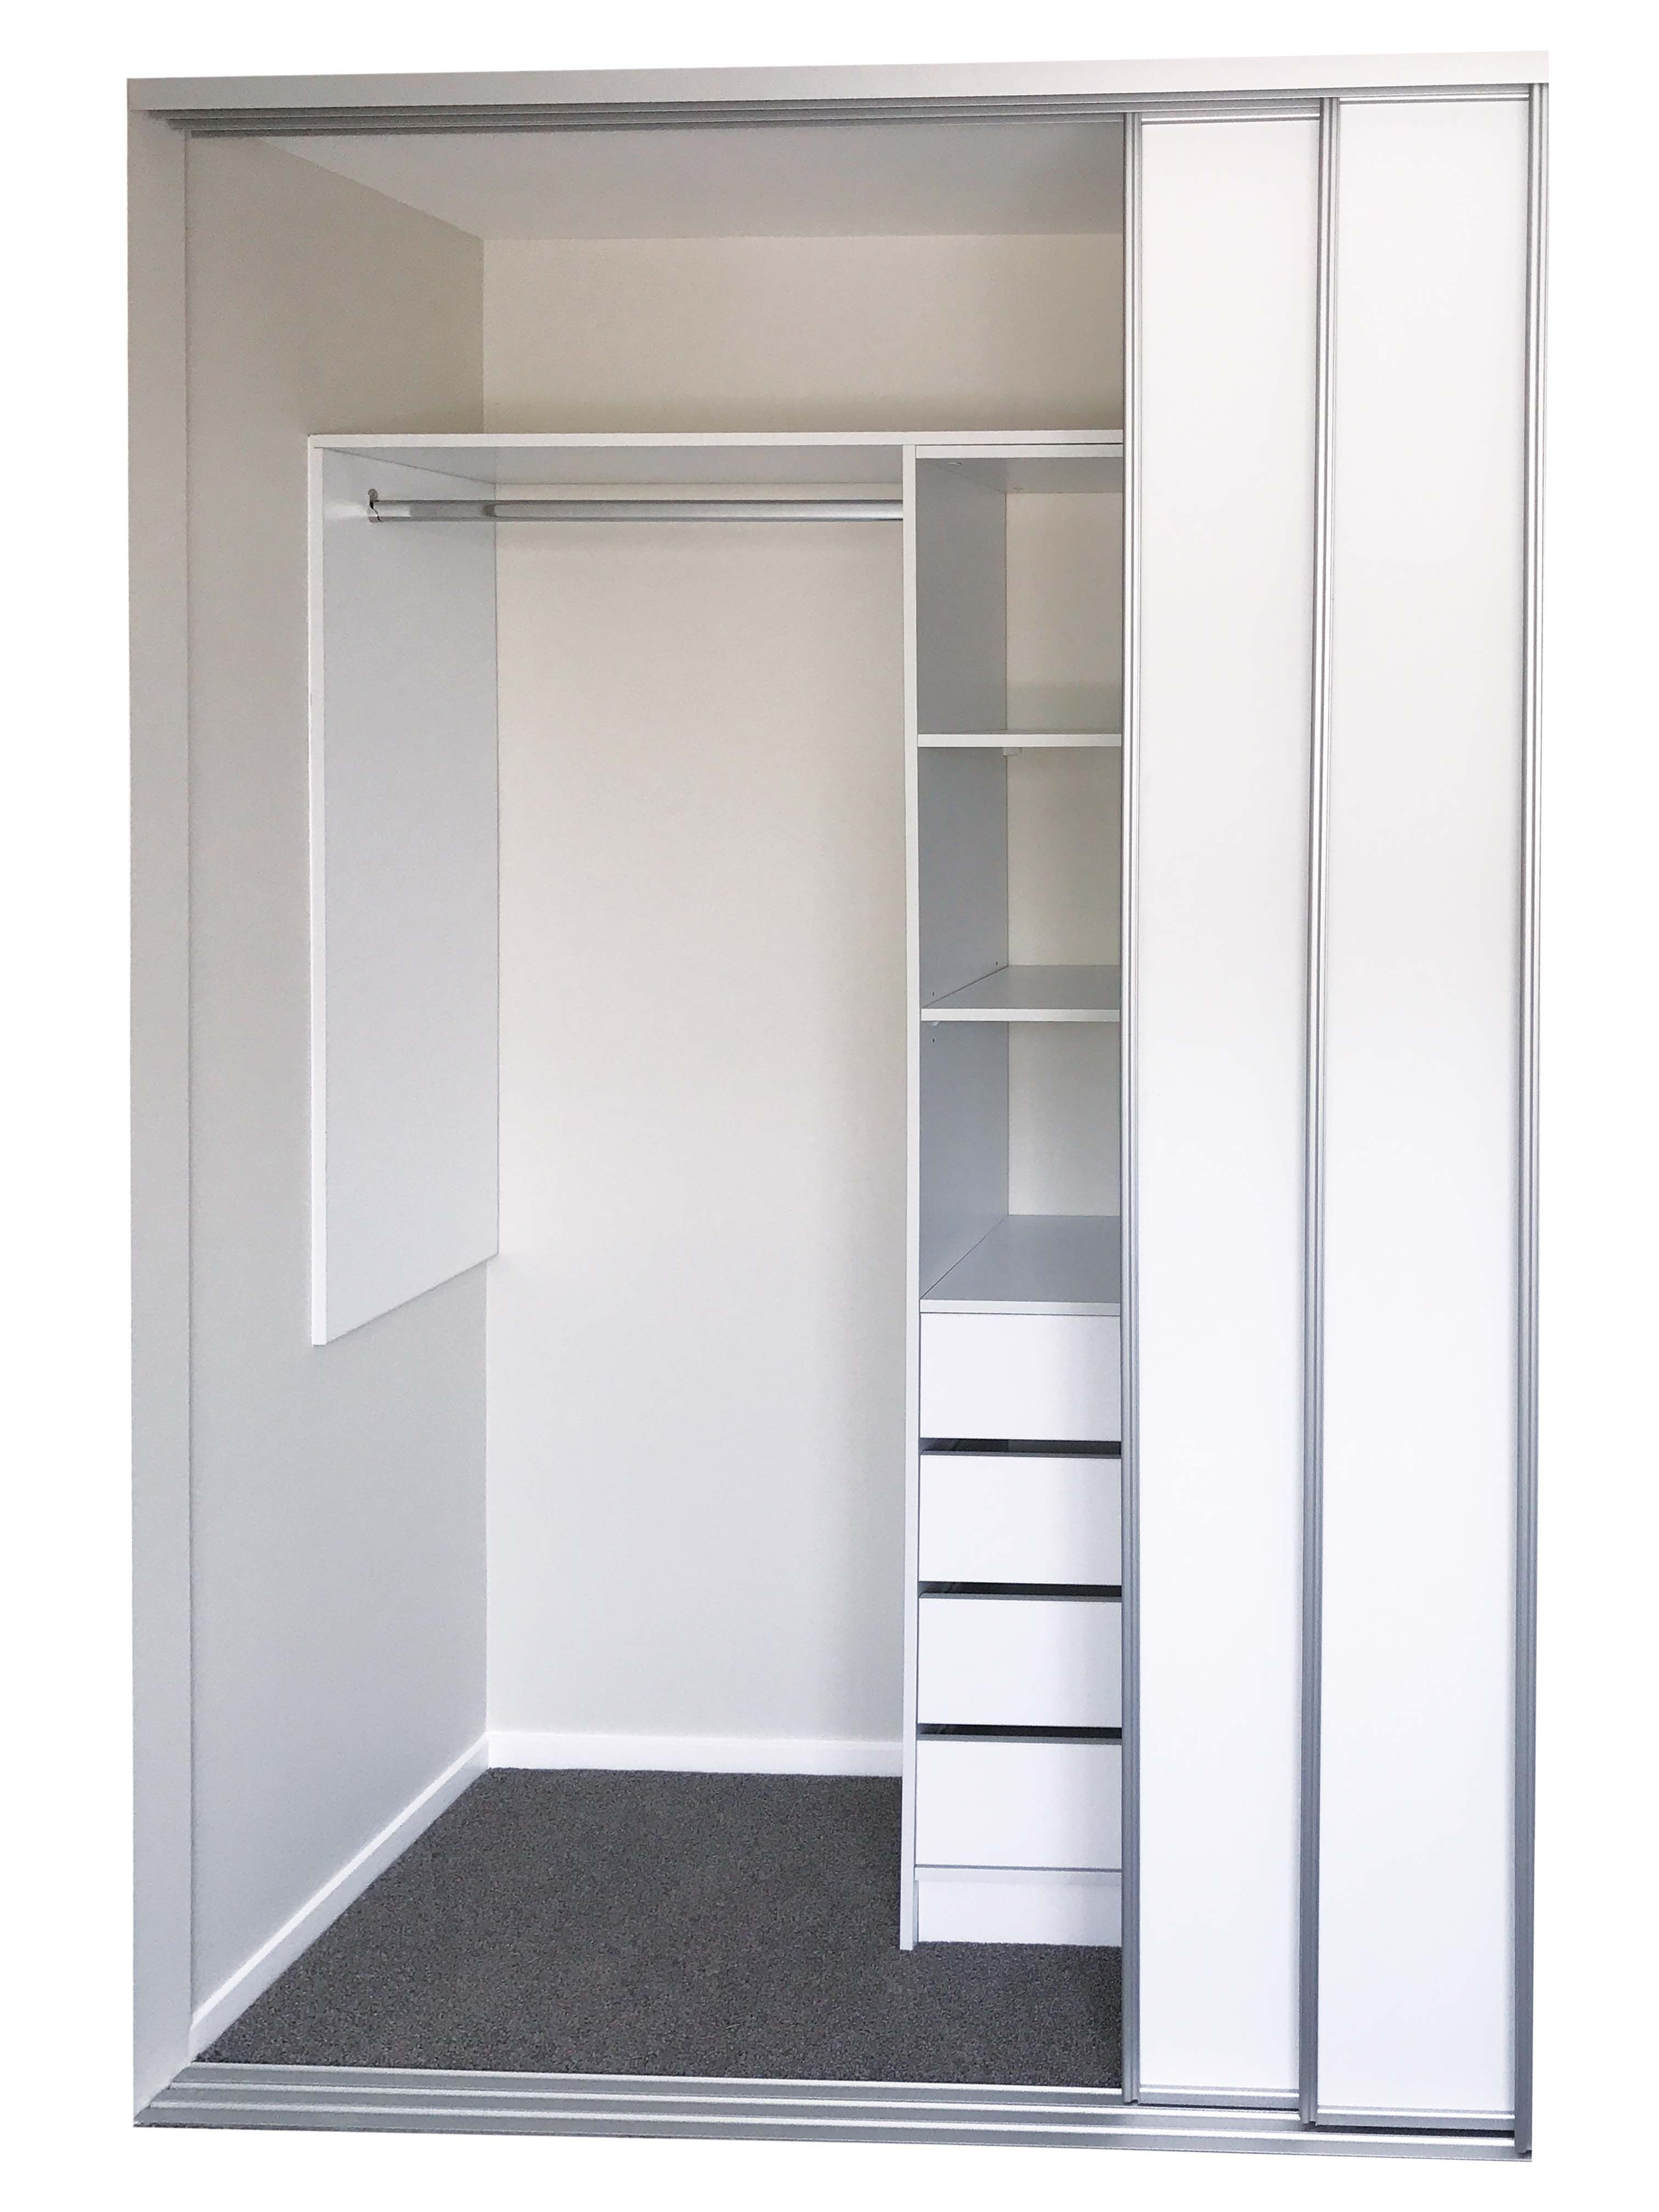 Genesis Modular Floor Standing Wardrobe Shelving | Showerwell Home Products For Wardrobes With 3 Shelving Towers (View 3 of 20)